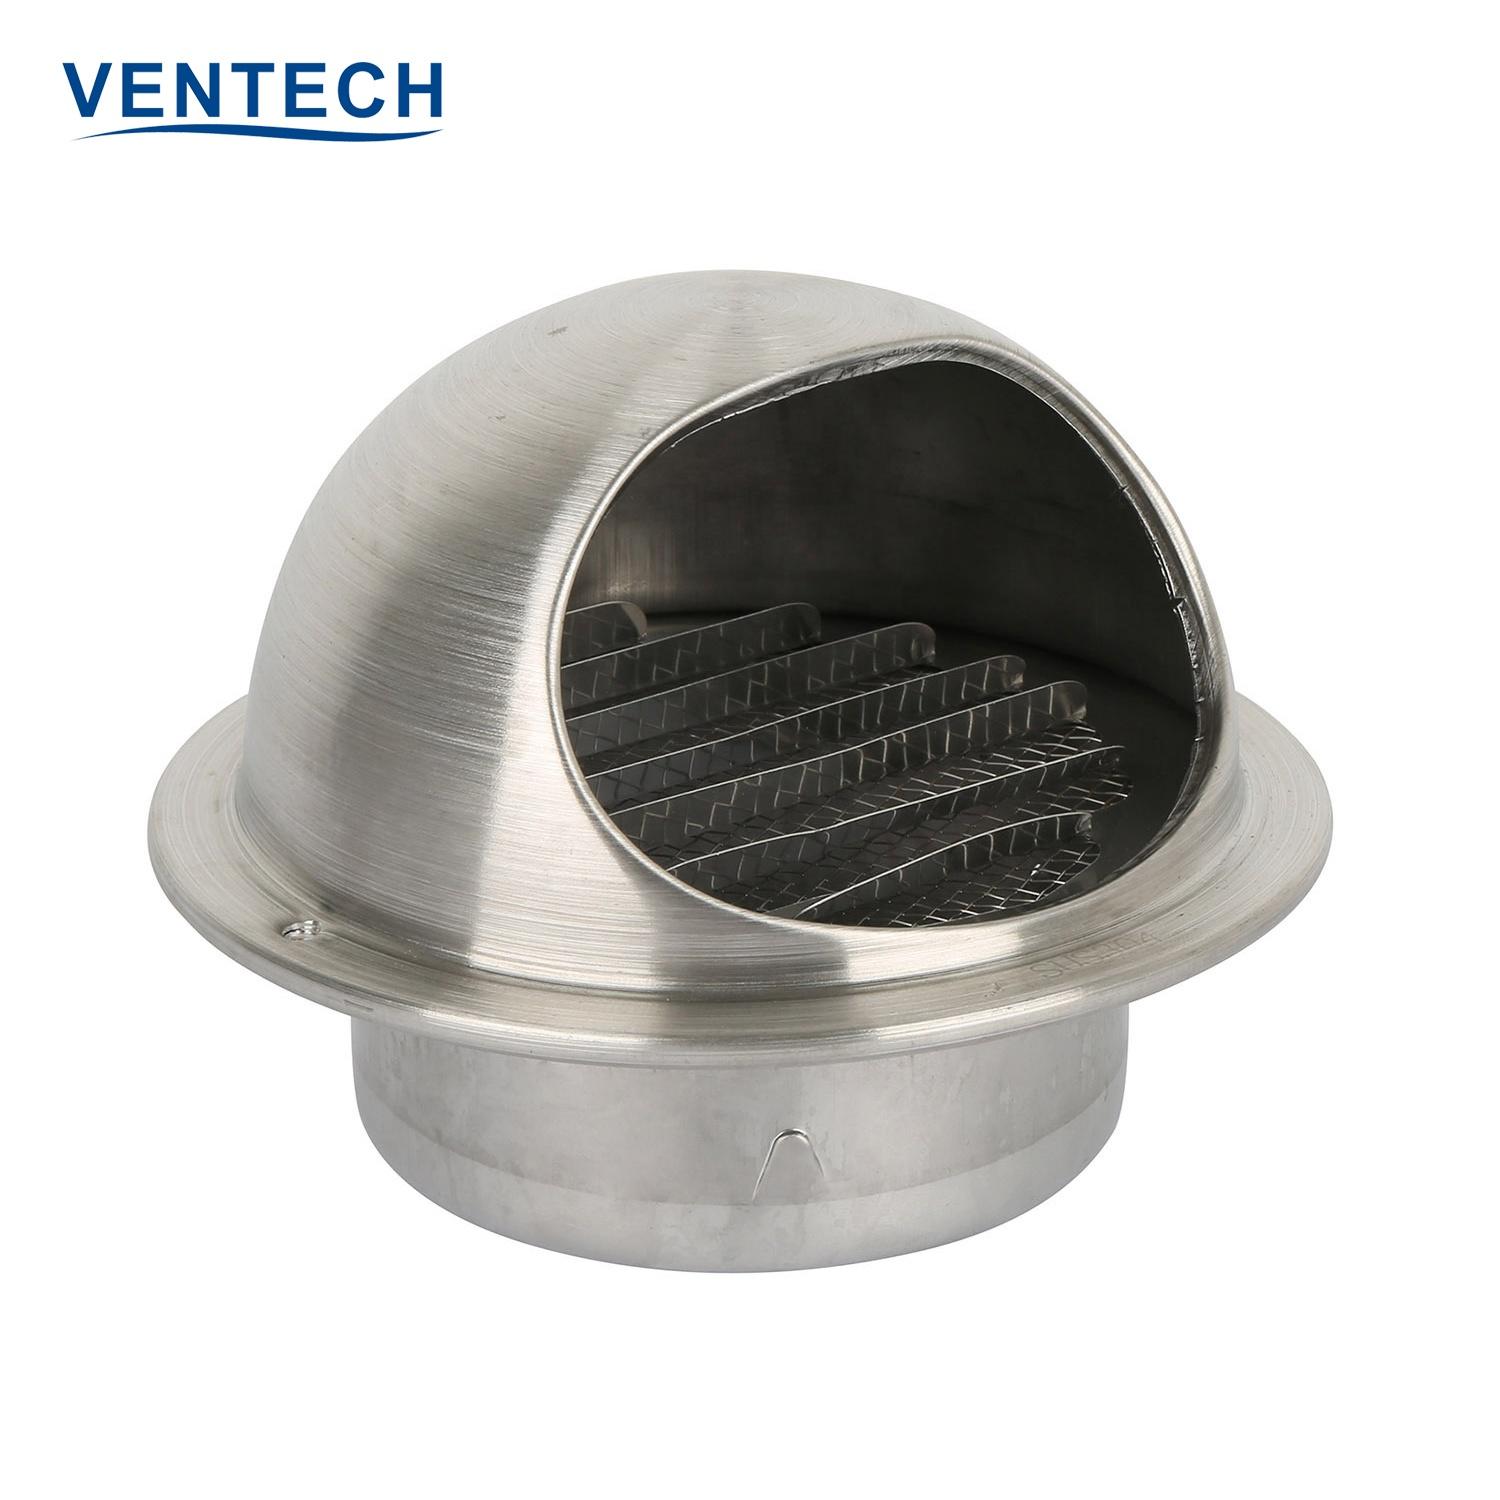 Hvac System Ball Directional Waterproof Exhaust Air Vent Cap For Ventilation